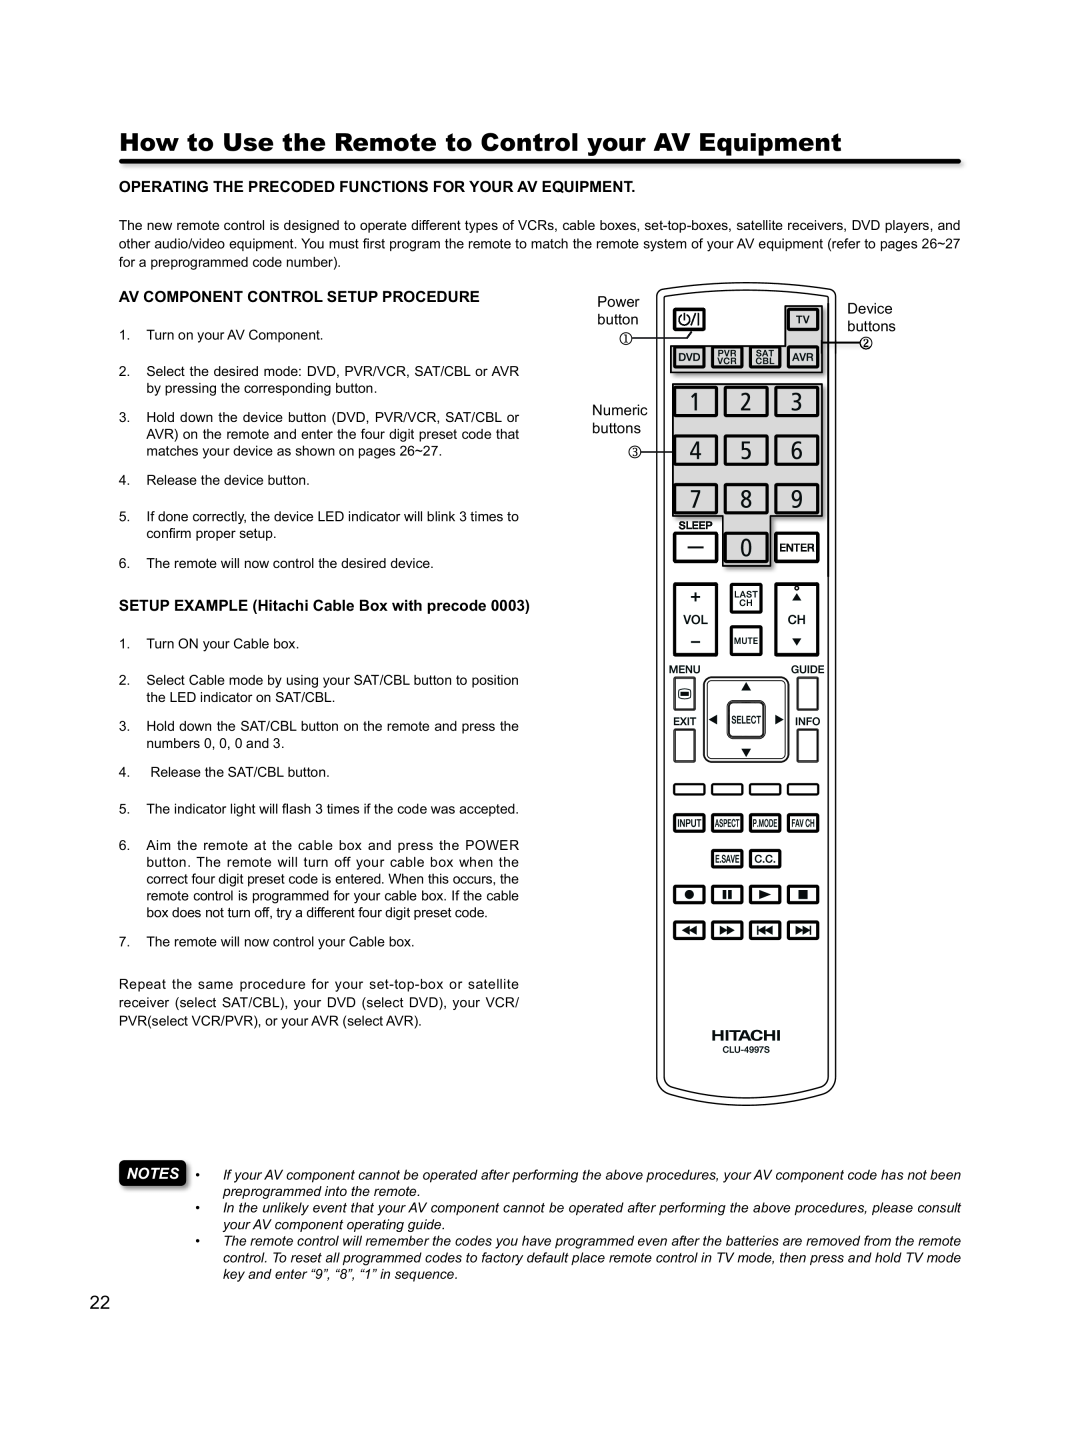 Hitachi L46S603 How to Use the Remote to Control your AV Equipment, Operating The Precoded Functions For Your Av Equipment 